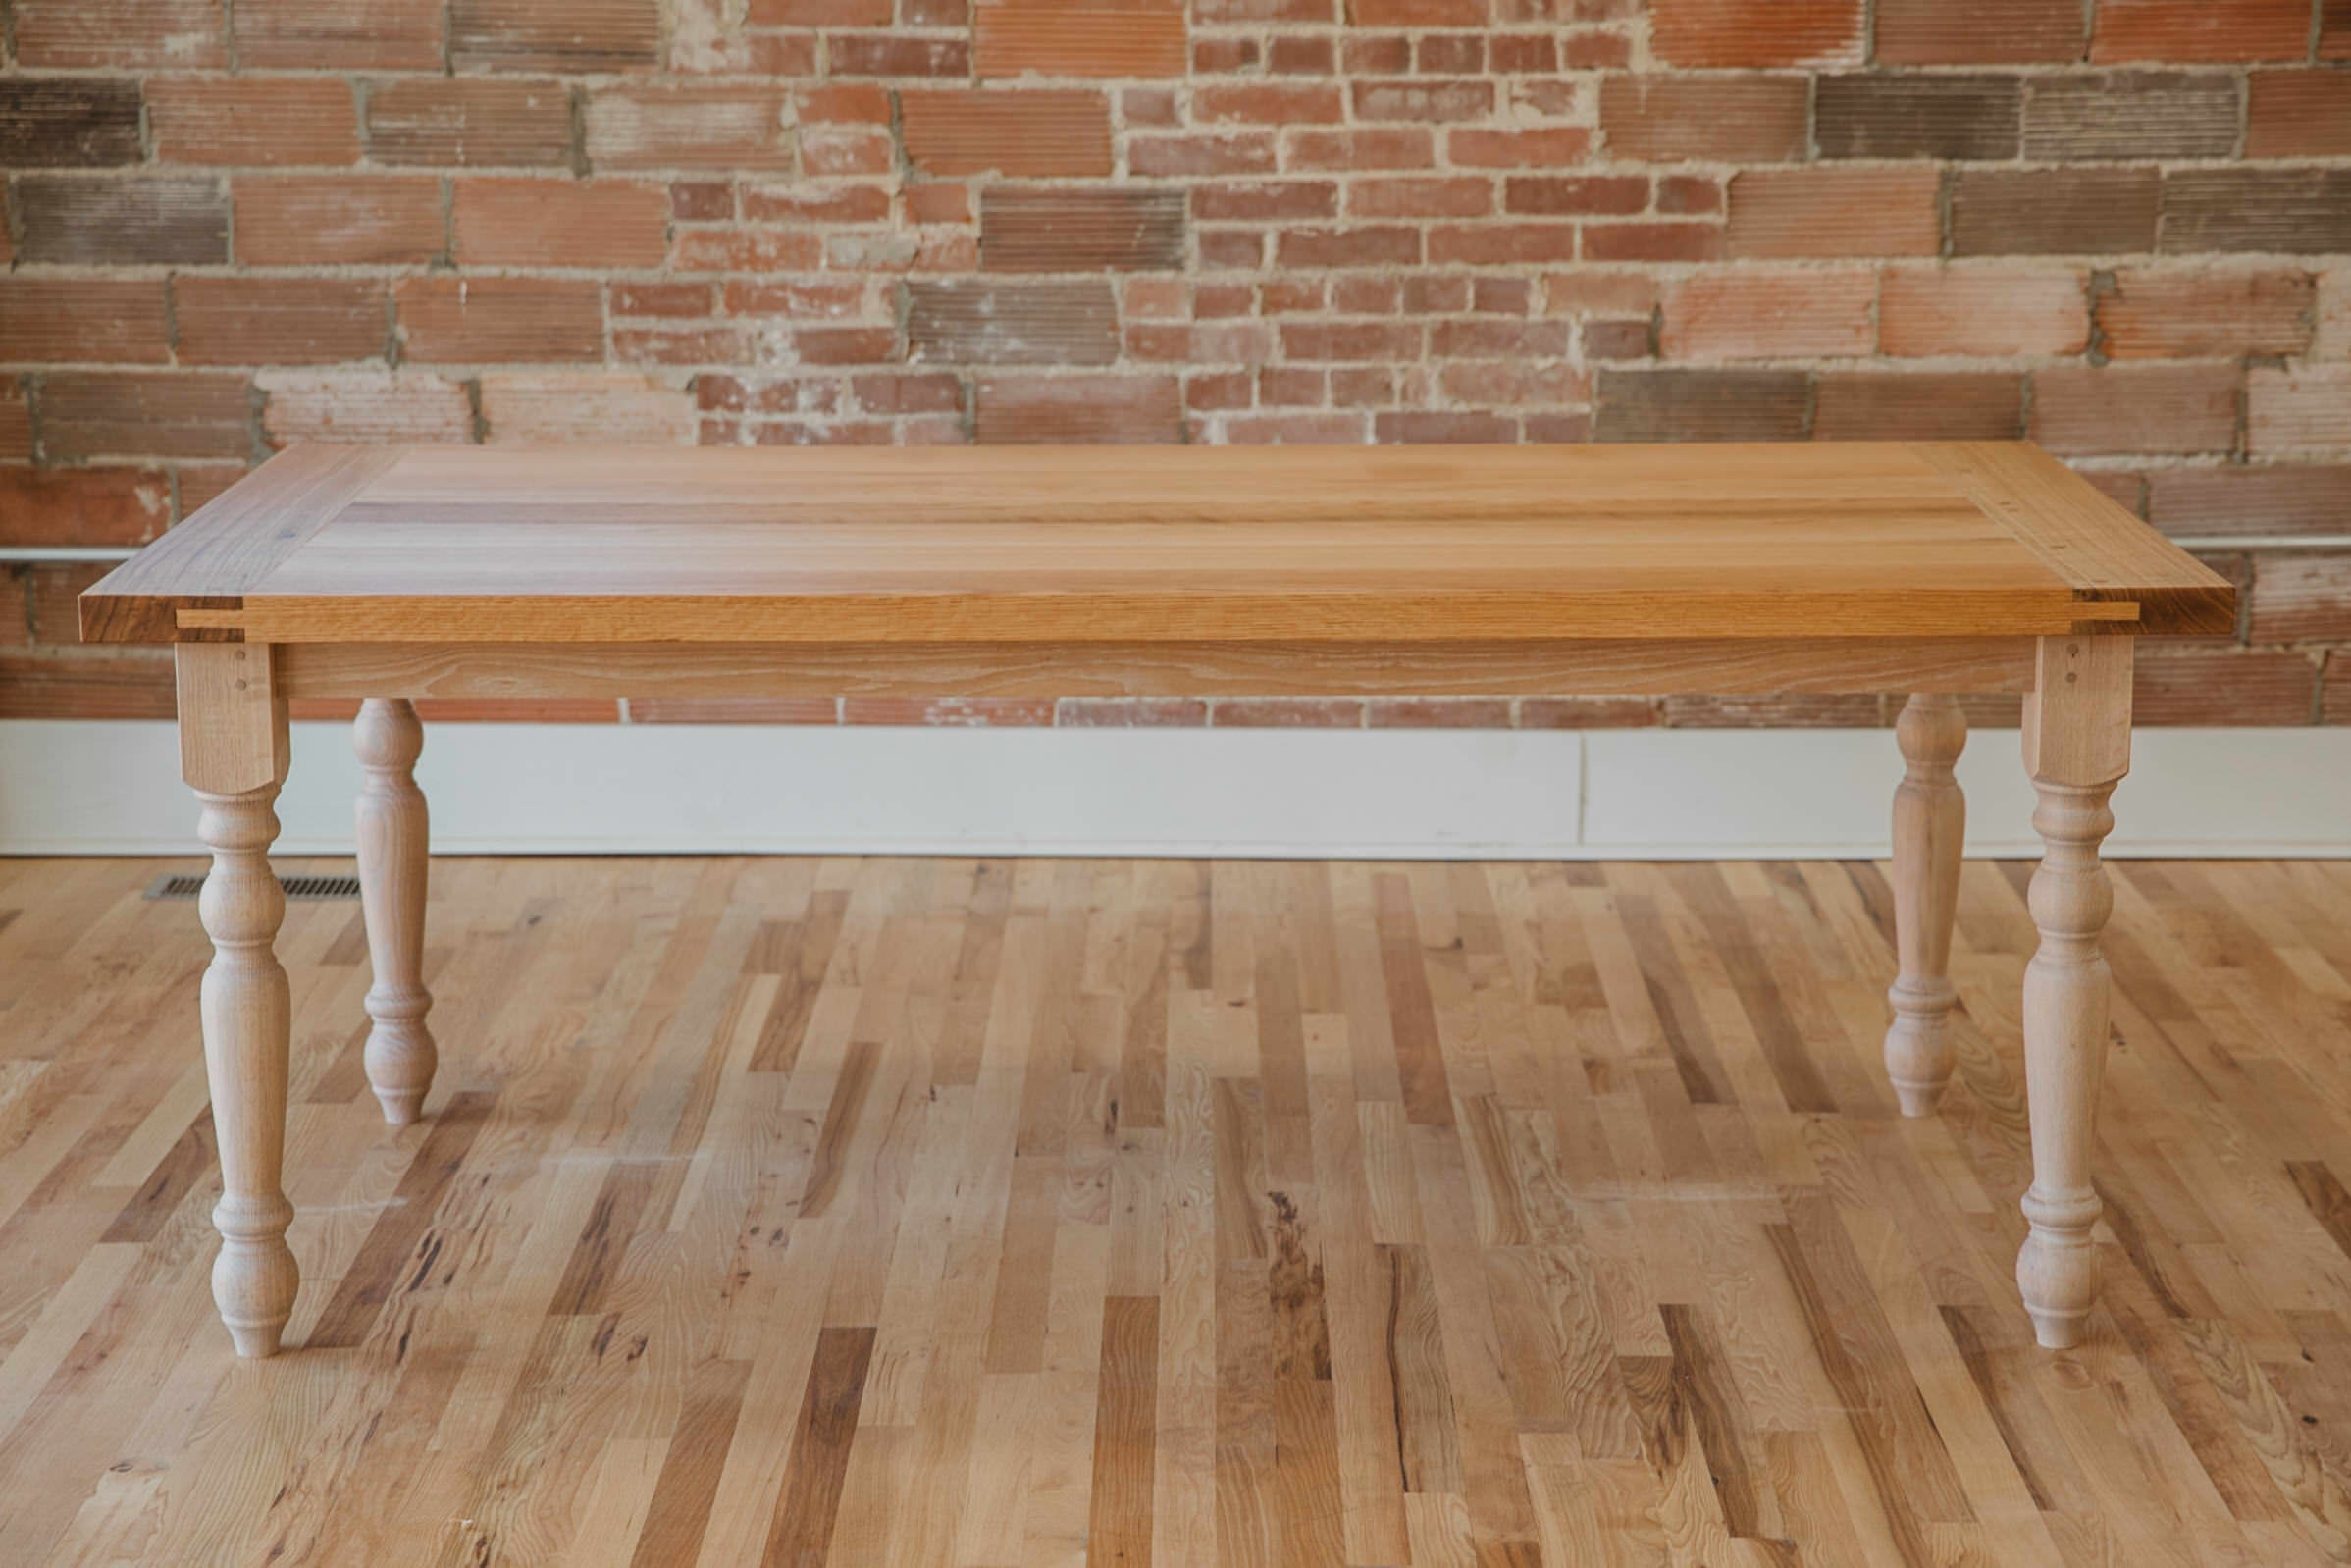 Big_tooth_Co-custom furniture maker_southern charm_farm_table_benches -5.jpg